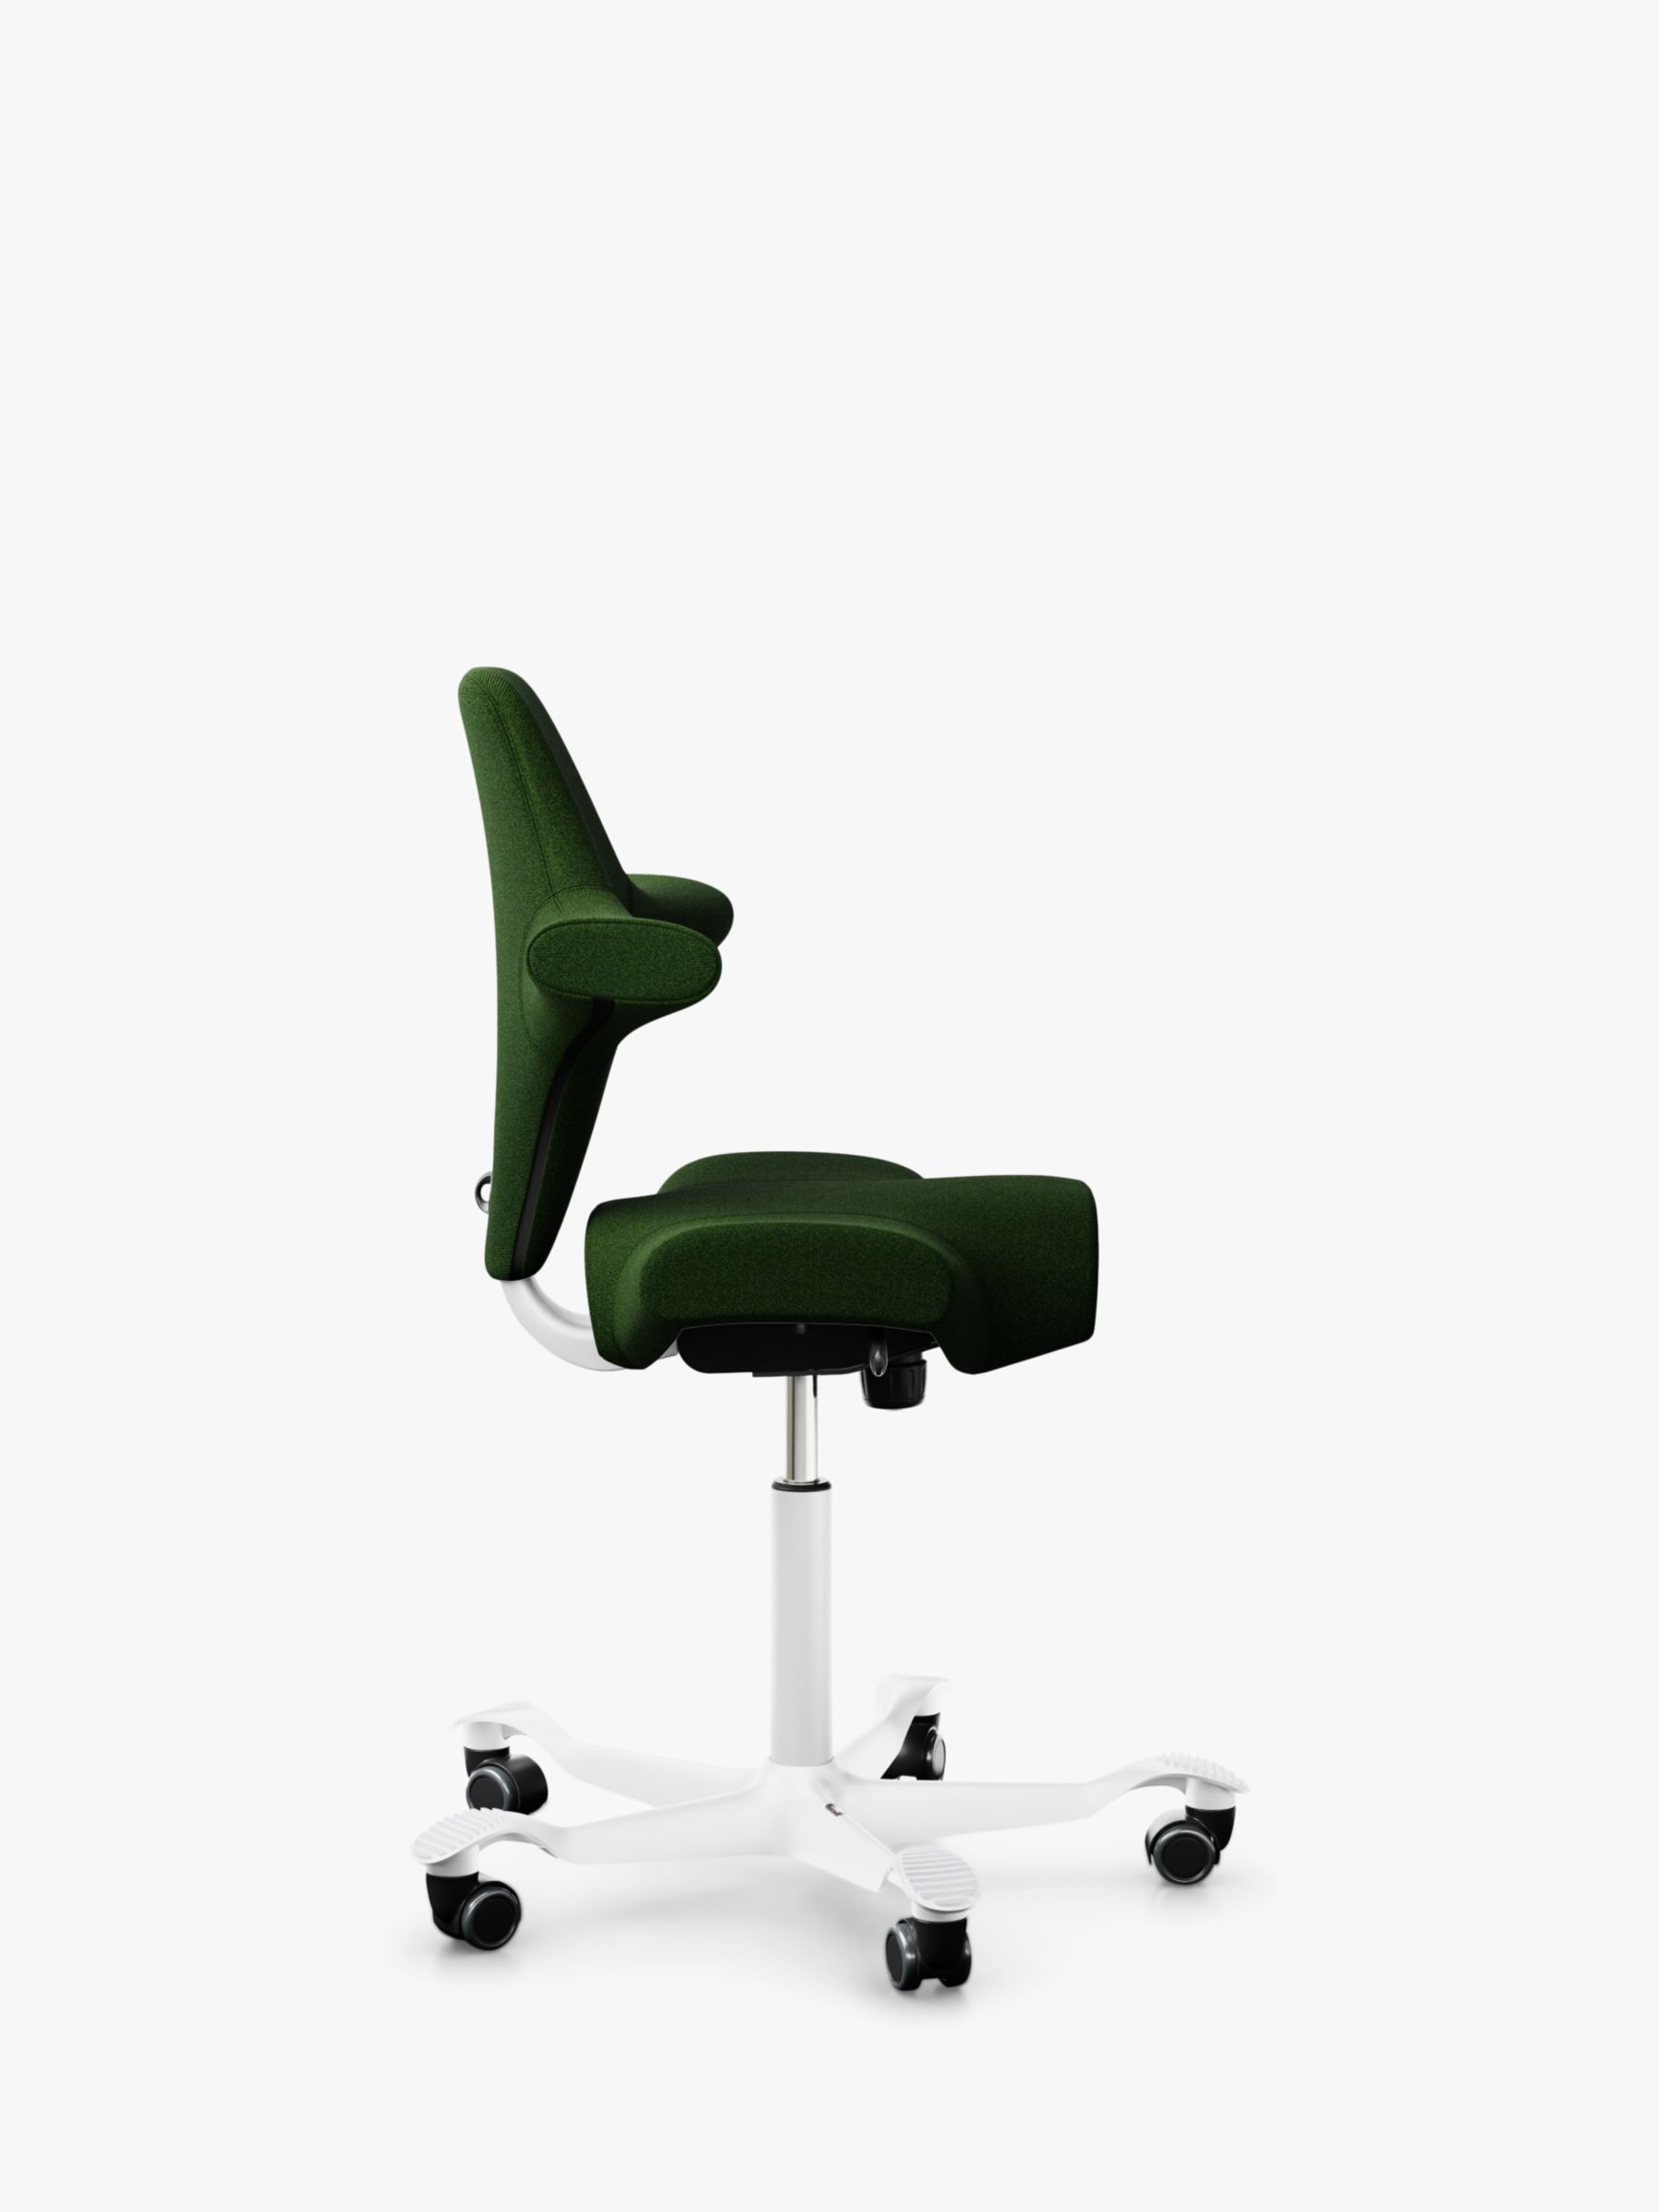 I am obsessed with the HAG Capisco Chair in green more than the kneeli